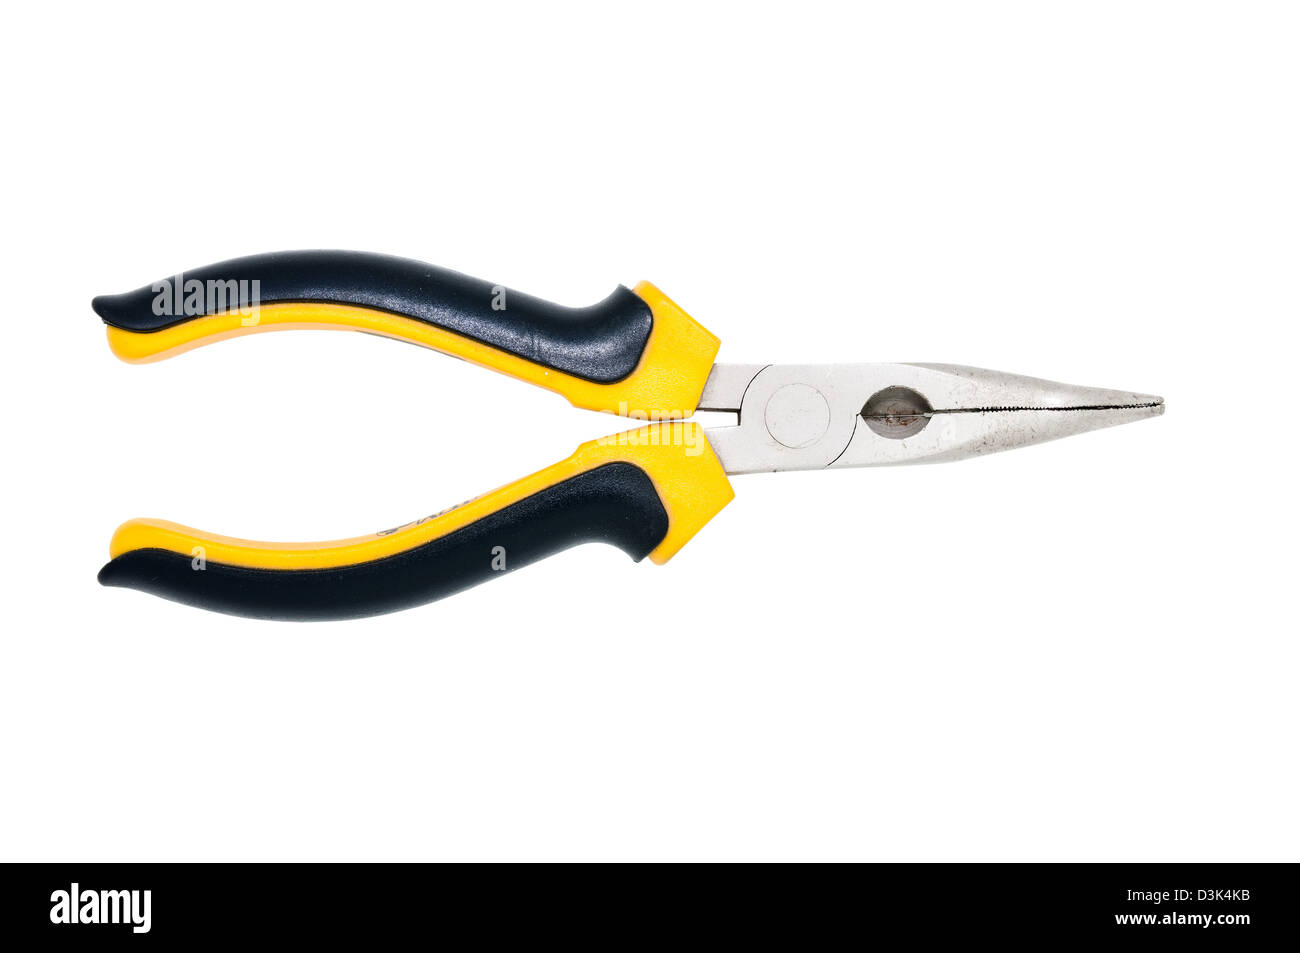 Small pliers